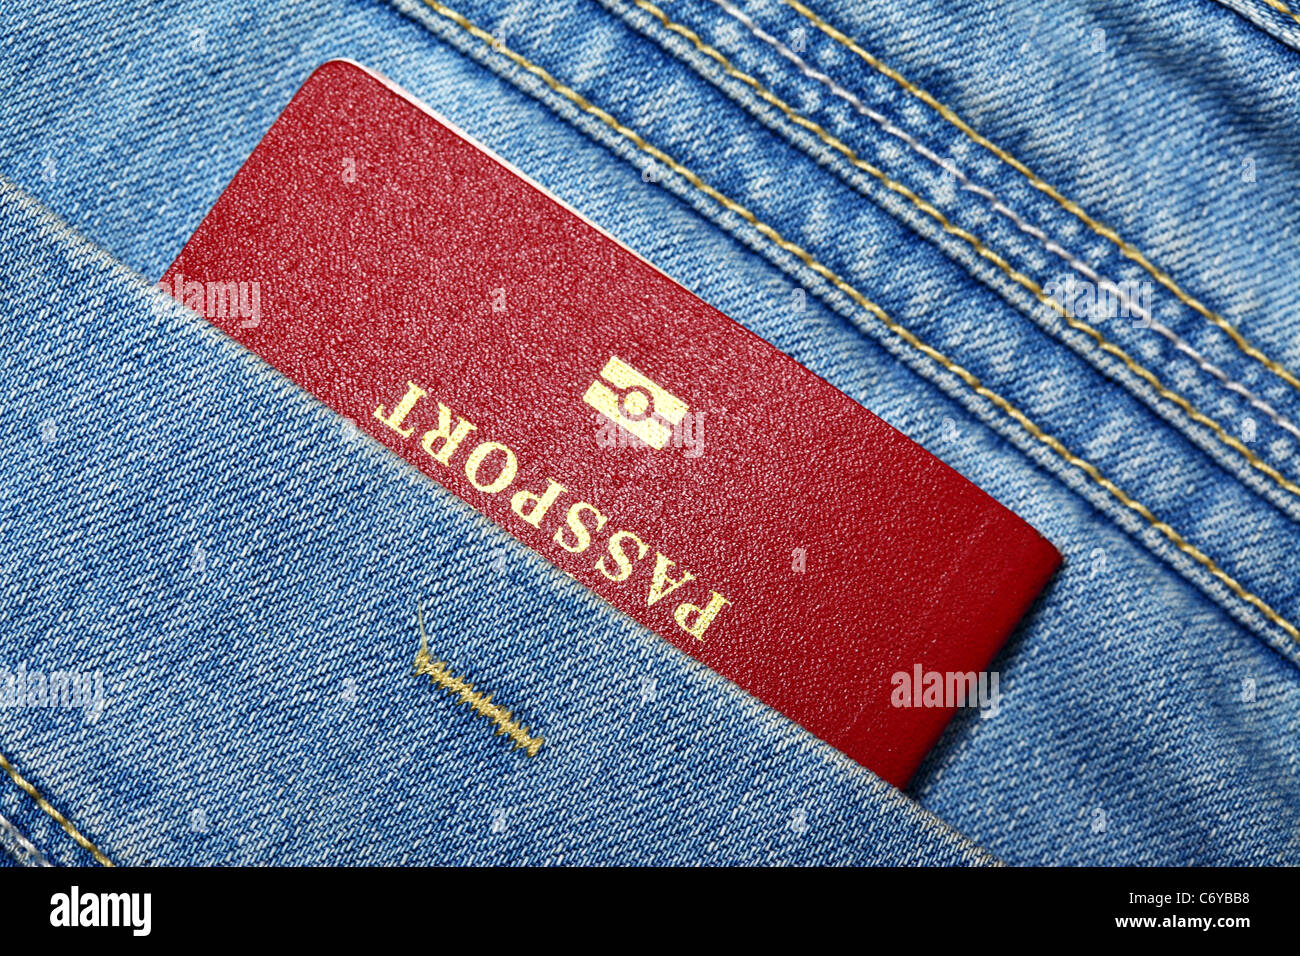 Biometric Passport High Resolution Stock Photography and Images - Alamy